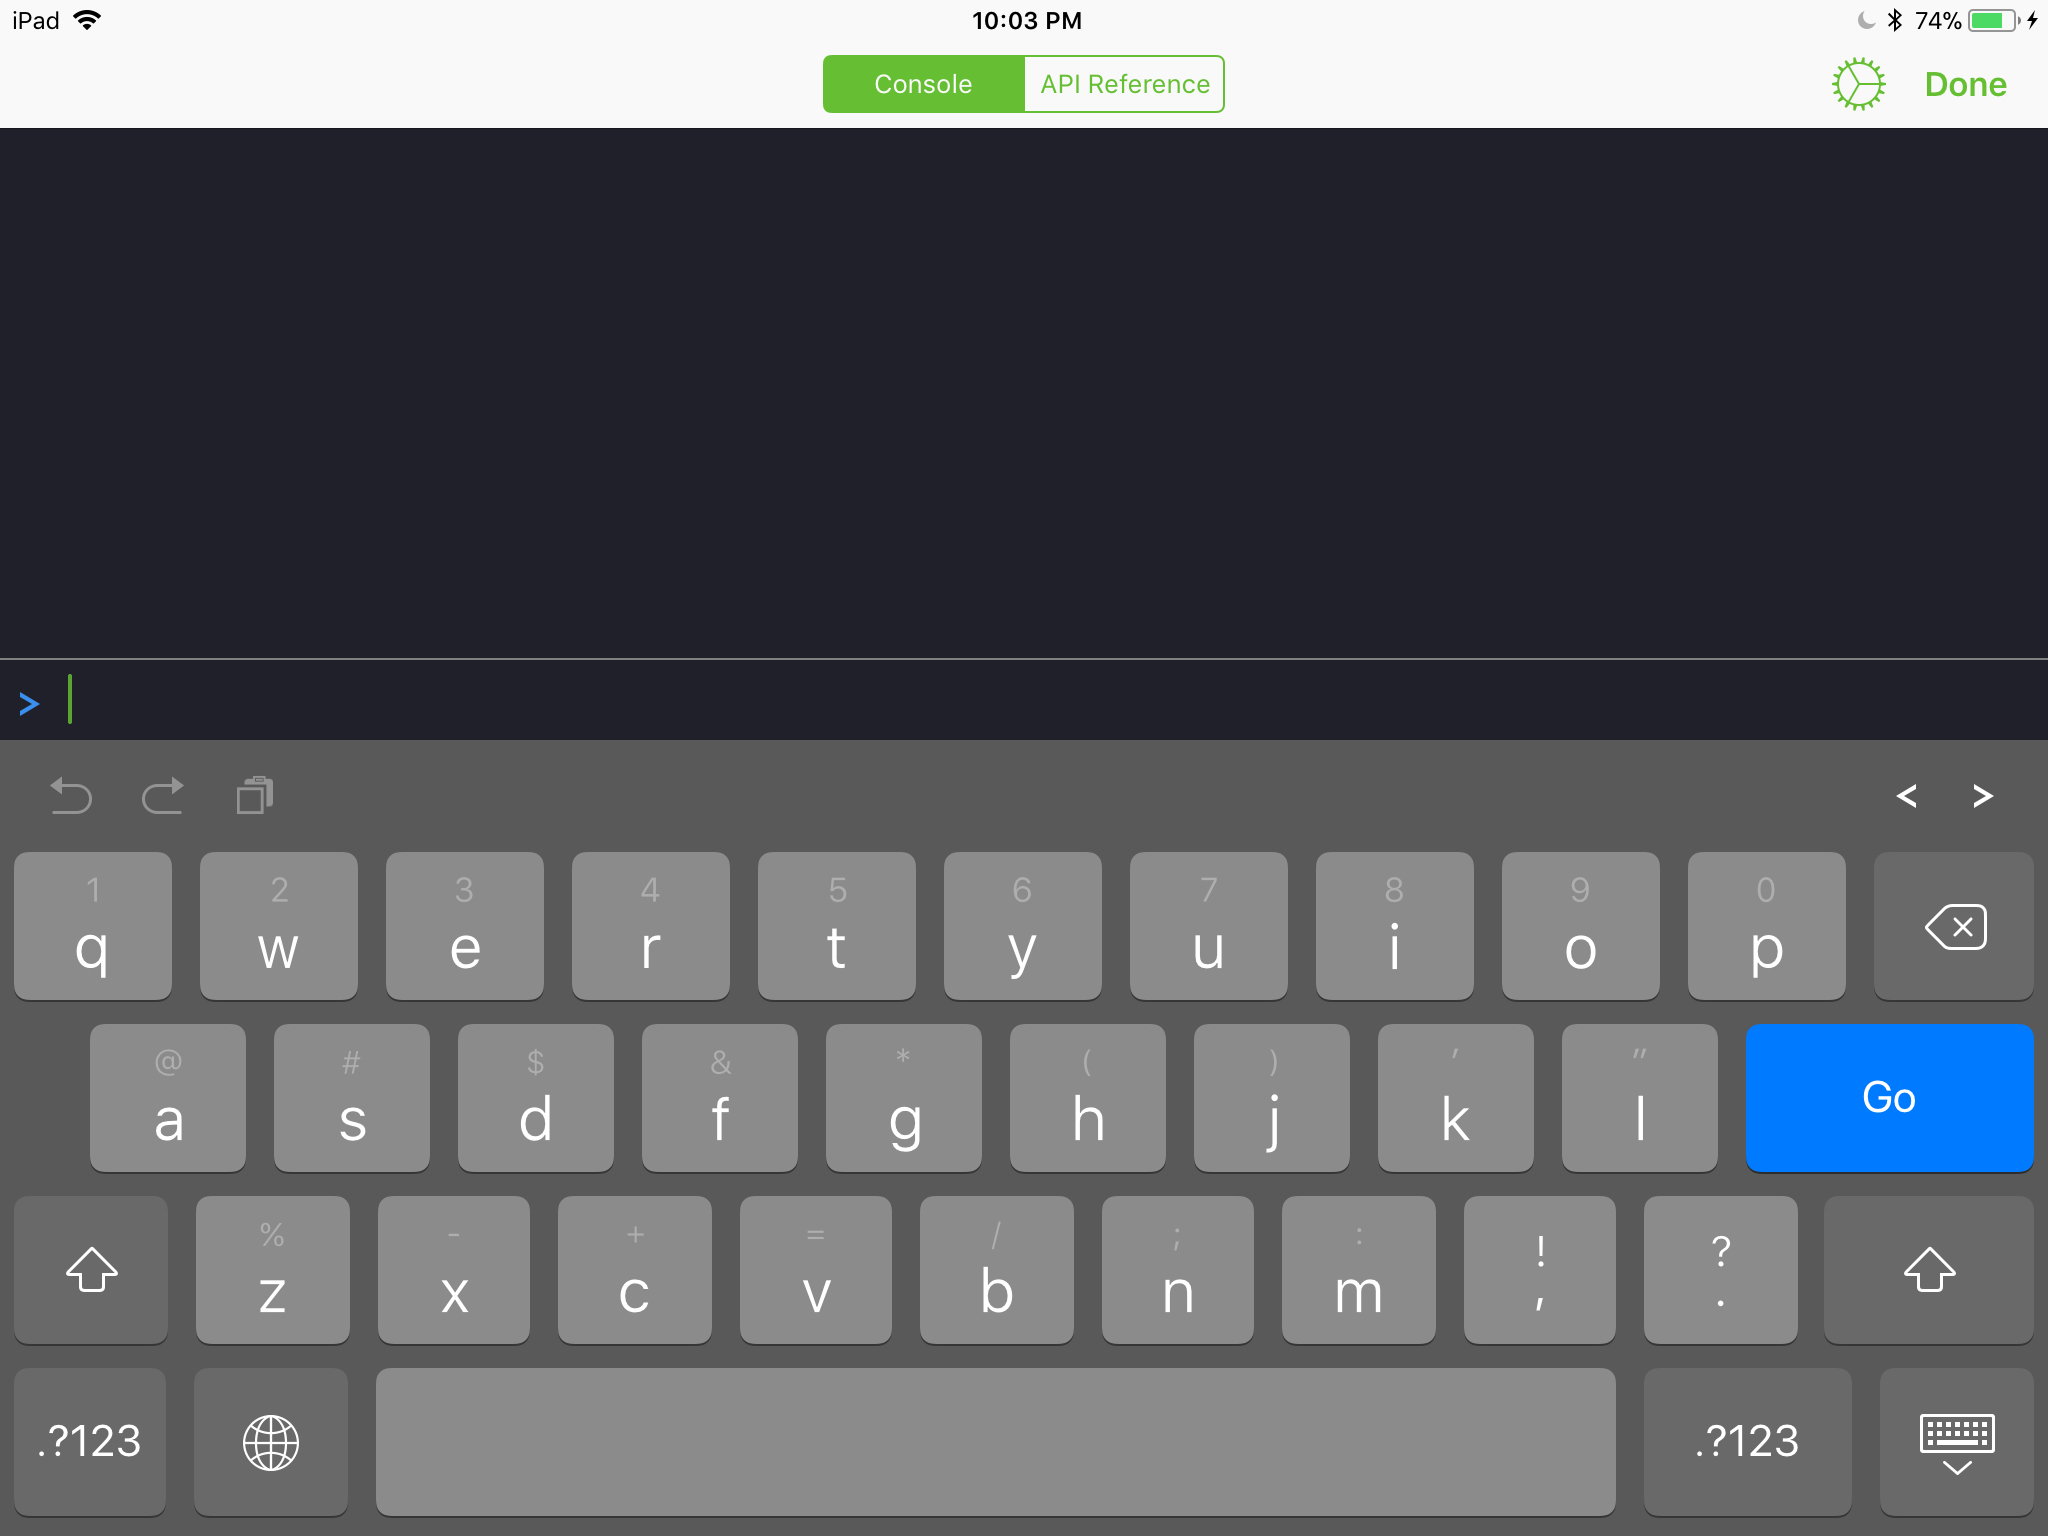 The iOS console with attached keyboard